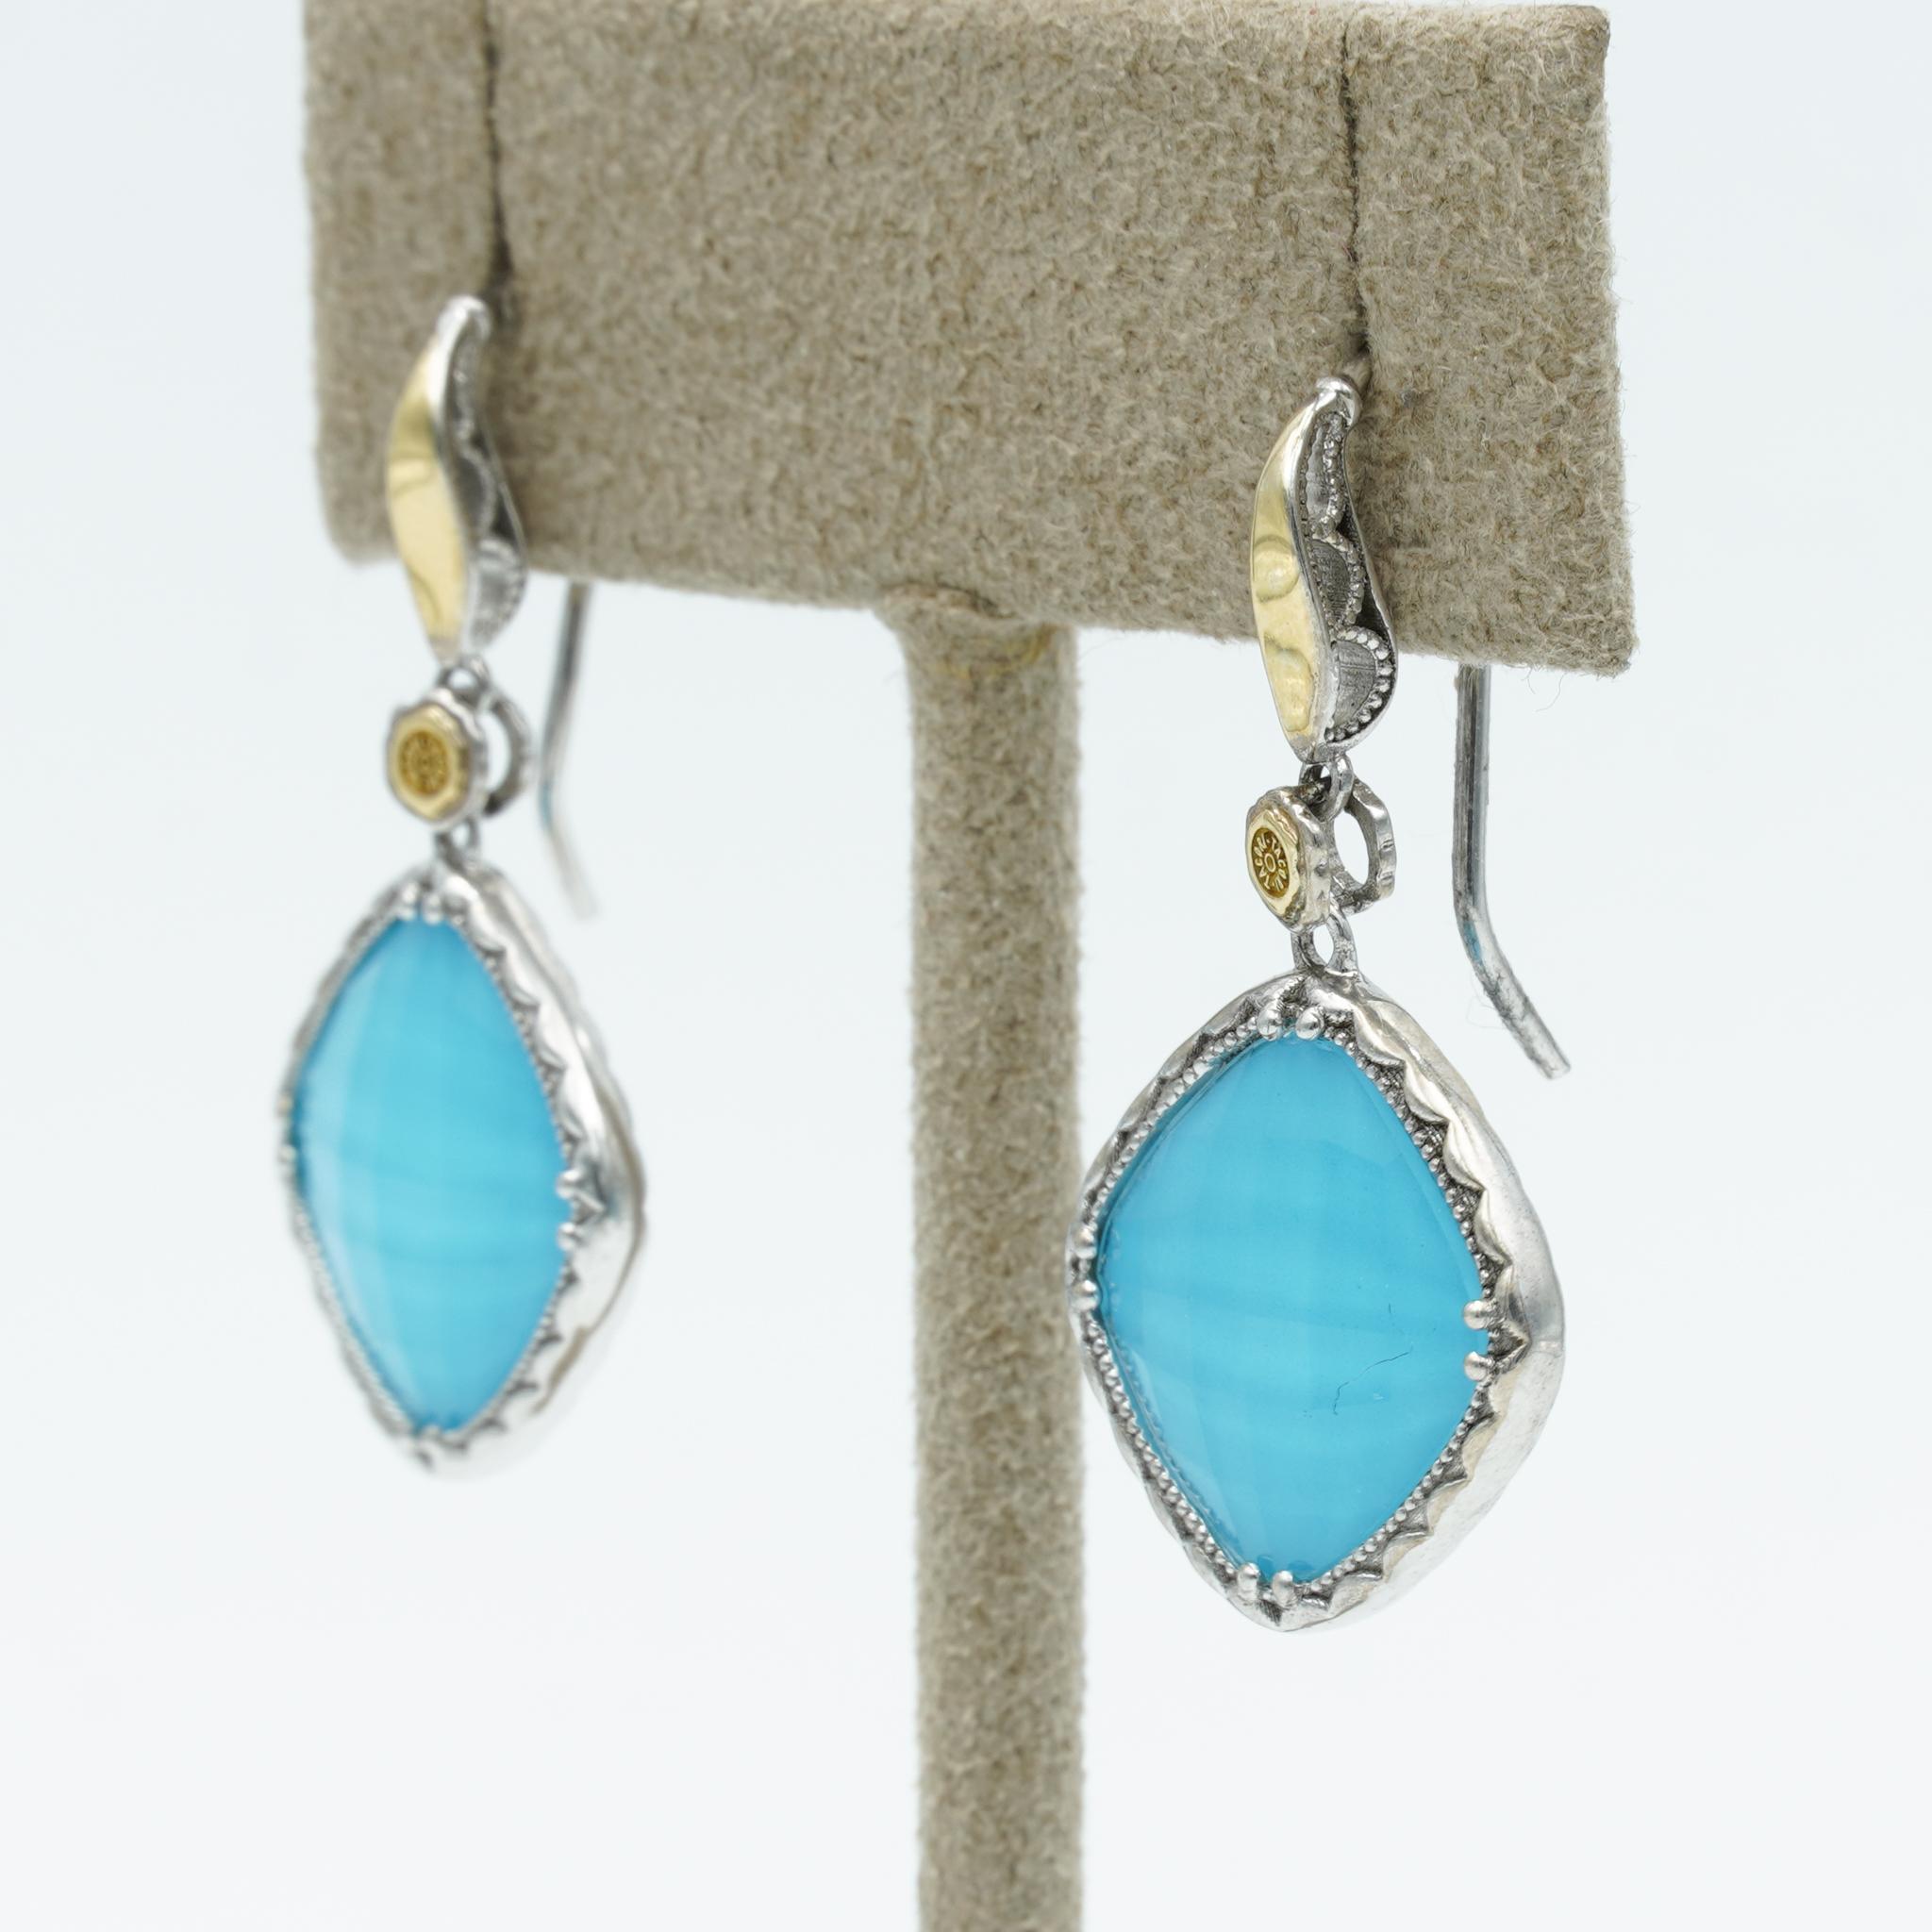 Take a dip into the beautiful blue seas of these single drop Clear Quartz over Neolite Turquoise diamond-shaped gemstone earrings encased in cool silver, hanging from an 18kt gold gem seal detailed French wire. Brand new. Handcrafted with